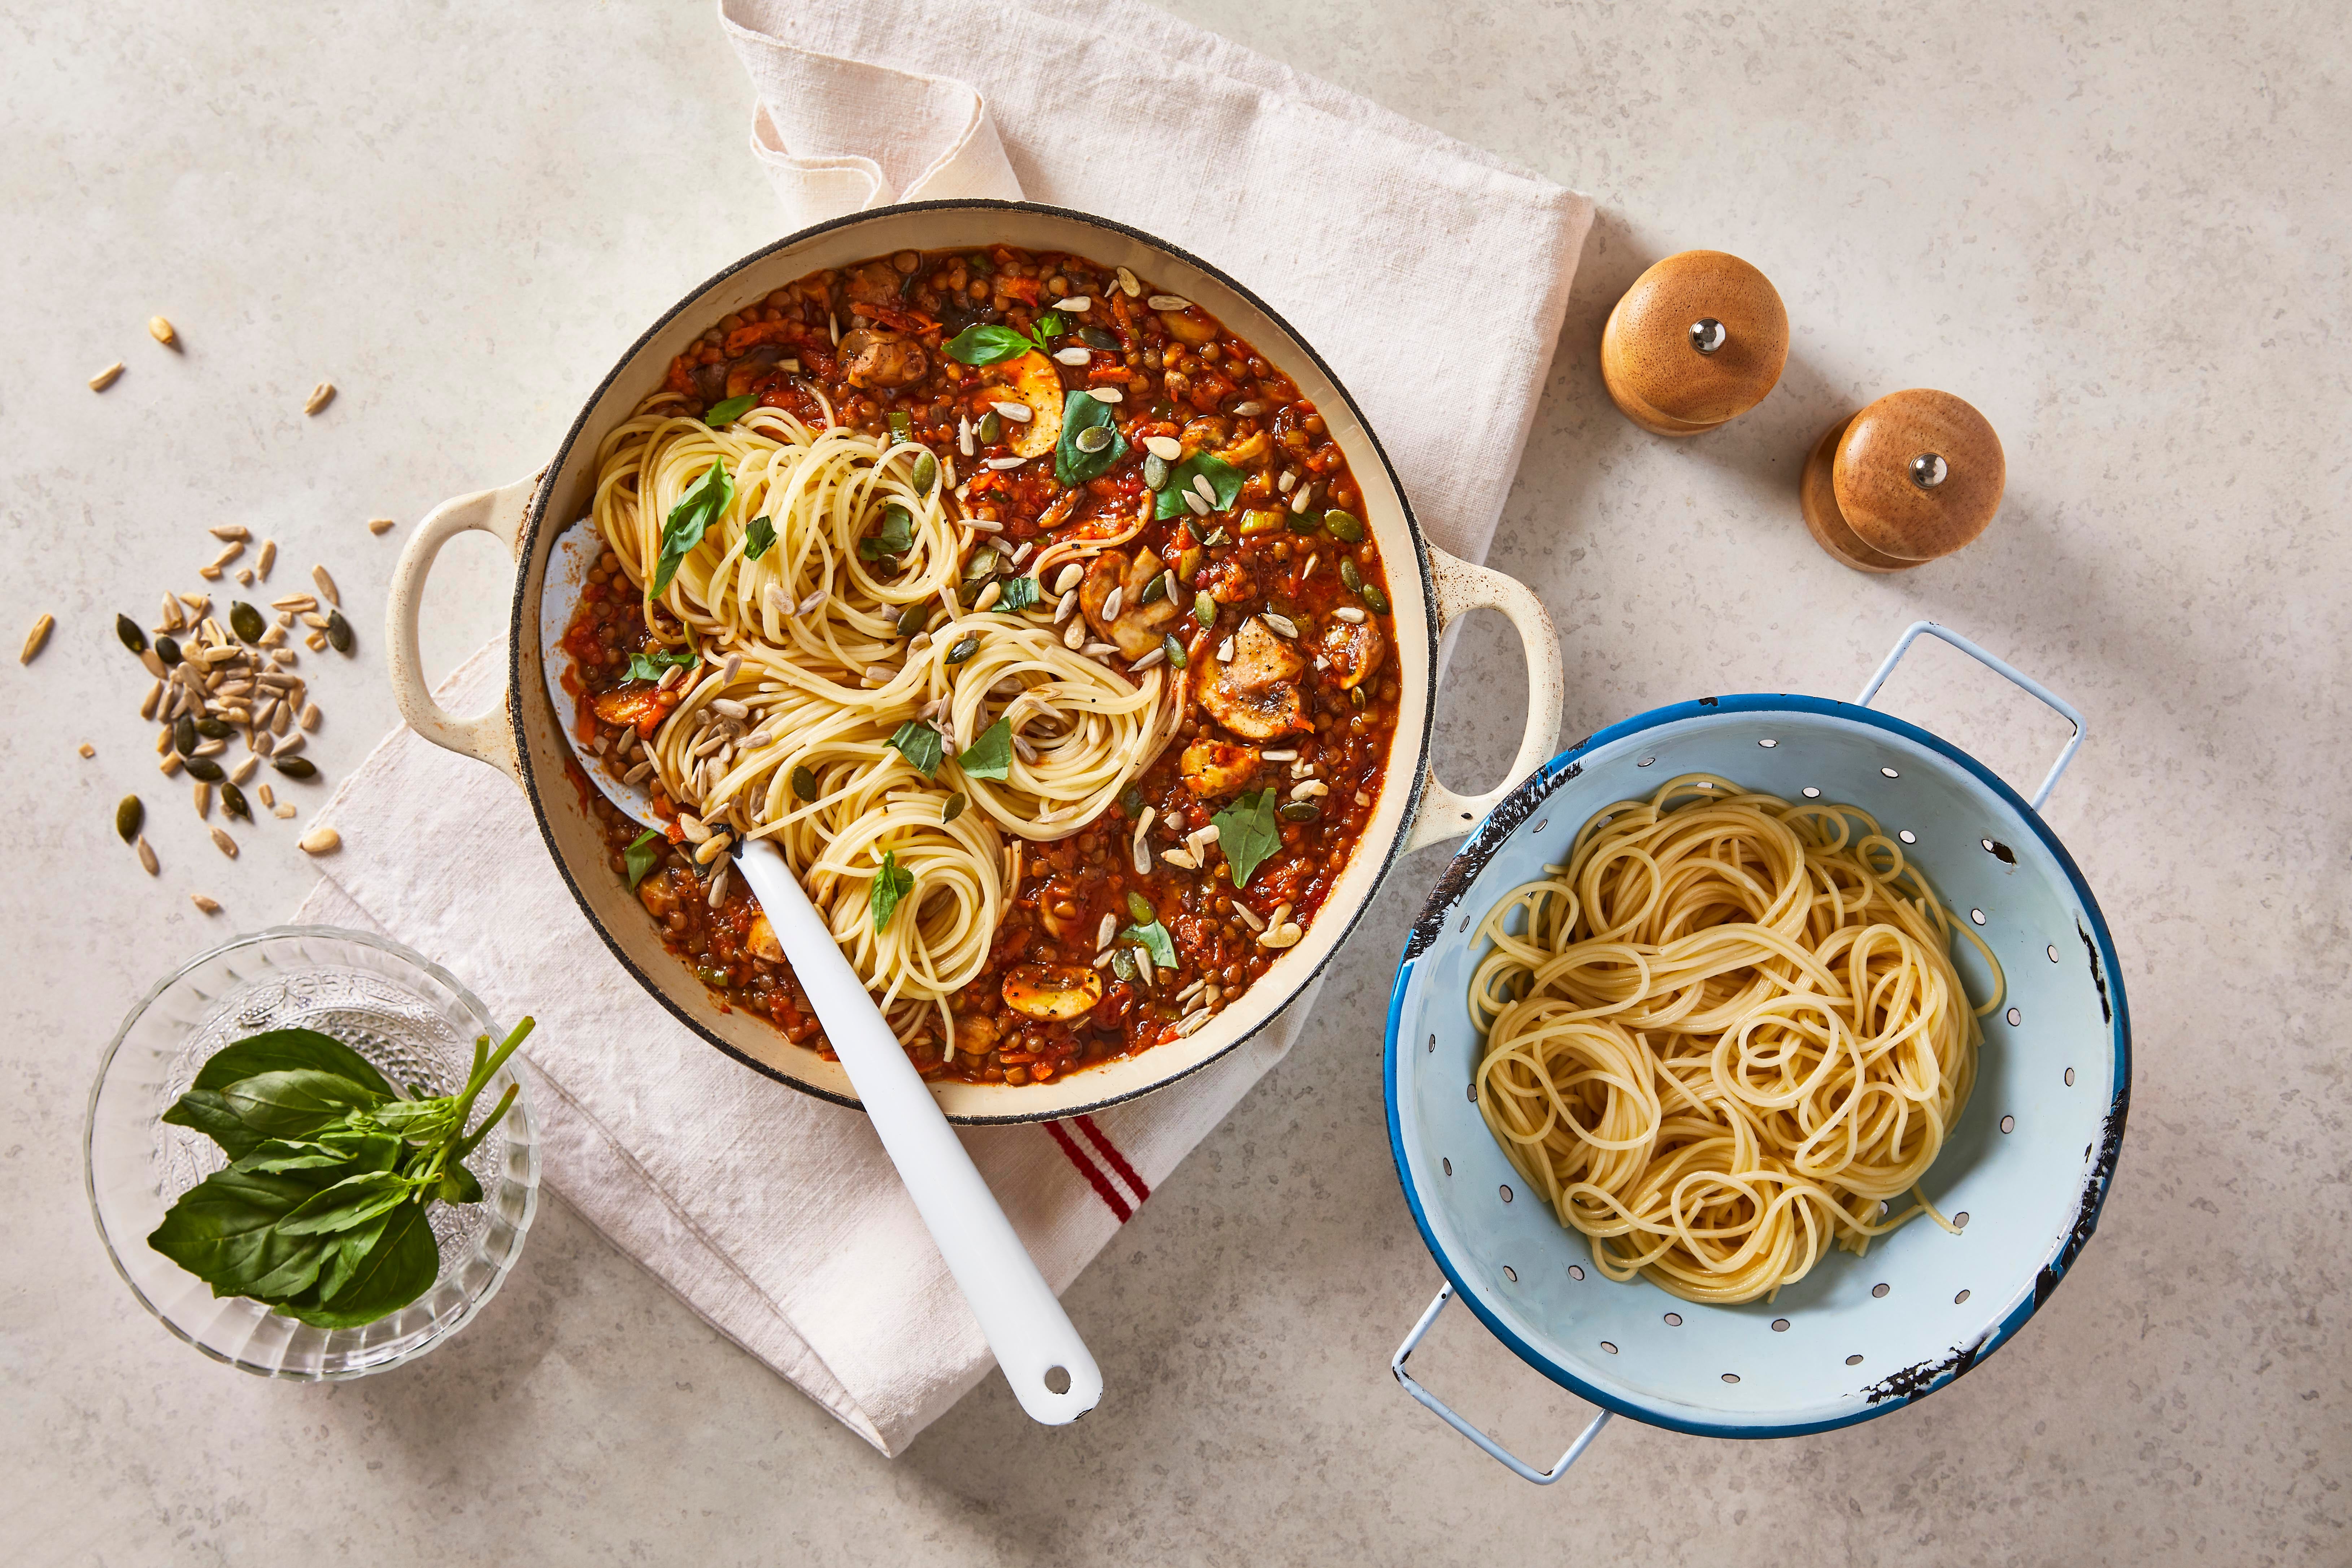 Pack flavour into this plant-based ragù with chestnut mushrooms, roasted garlic and Marmite